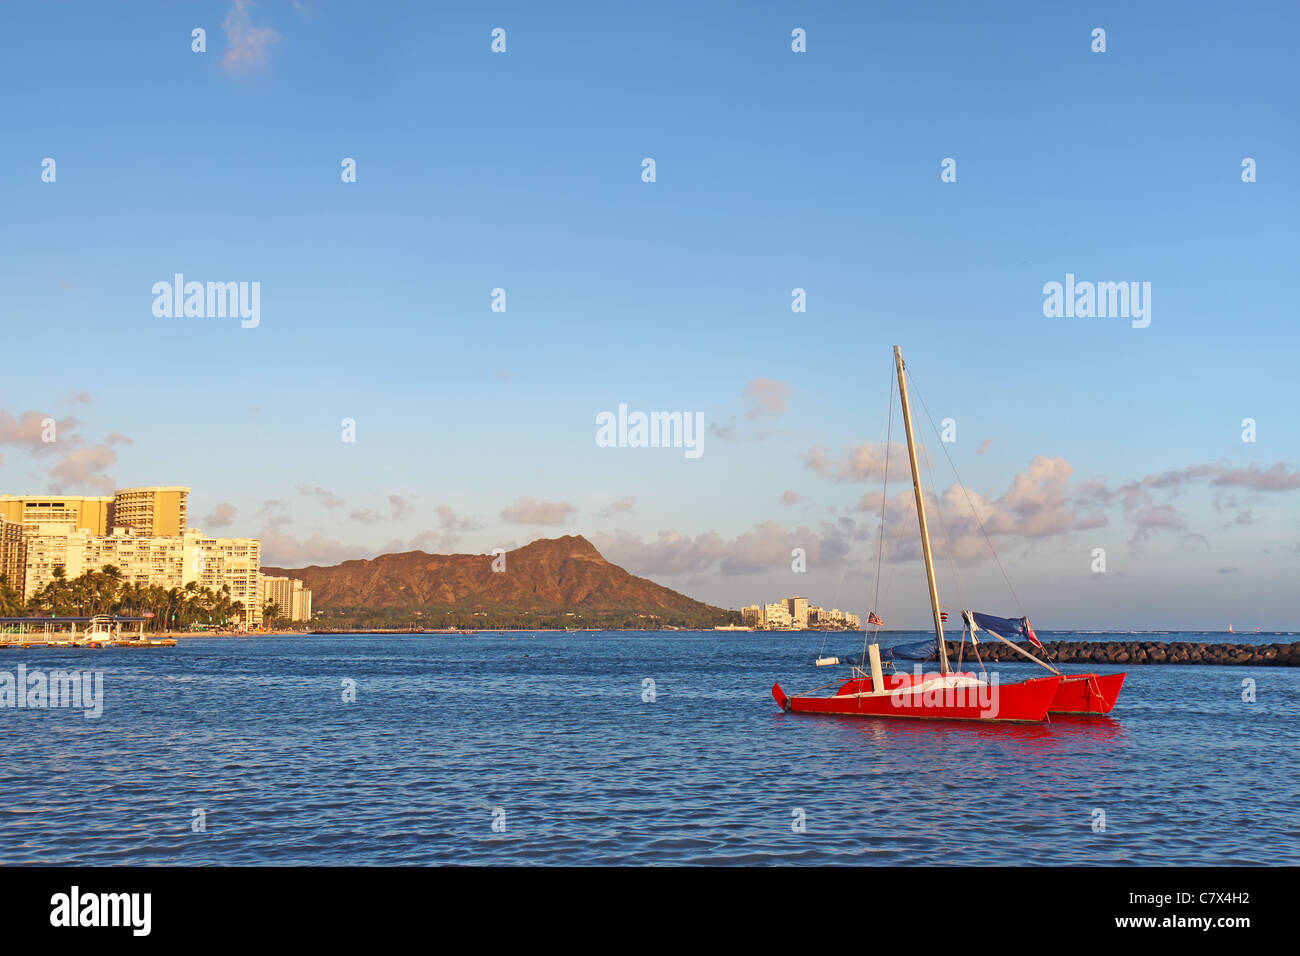 Catamaran and several hotels along Waikiki beach at Honolulu, Hawaii, with the volcanic cone of Diamond Head in the background Stock Photo